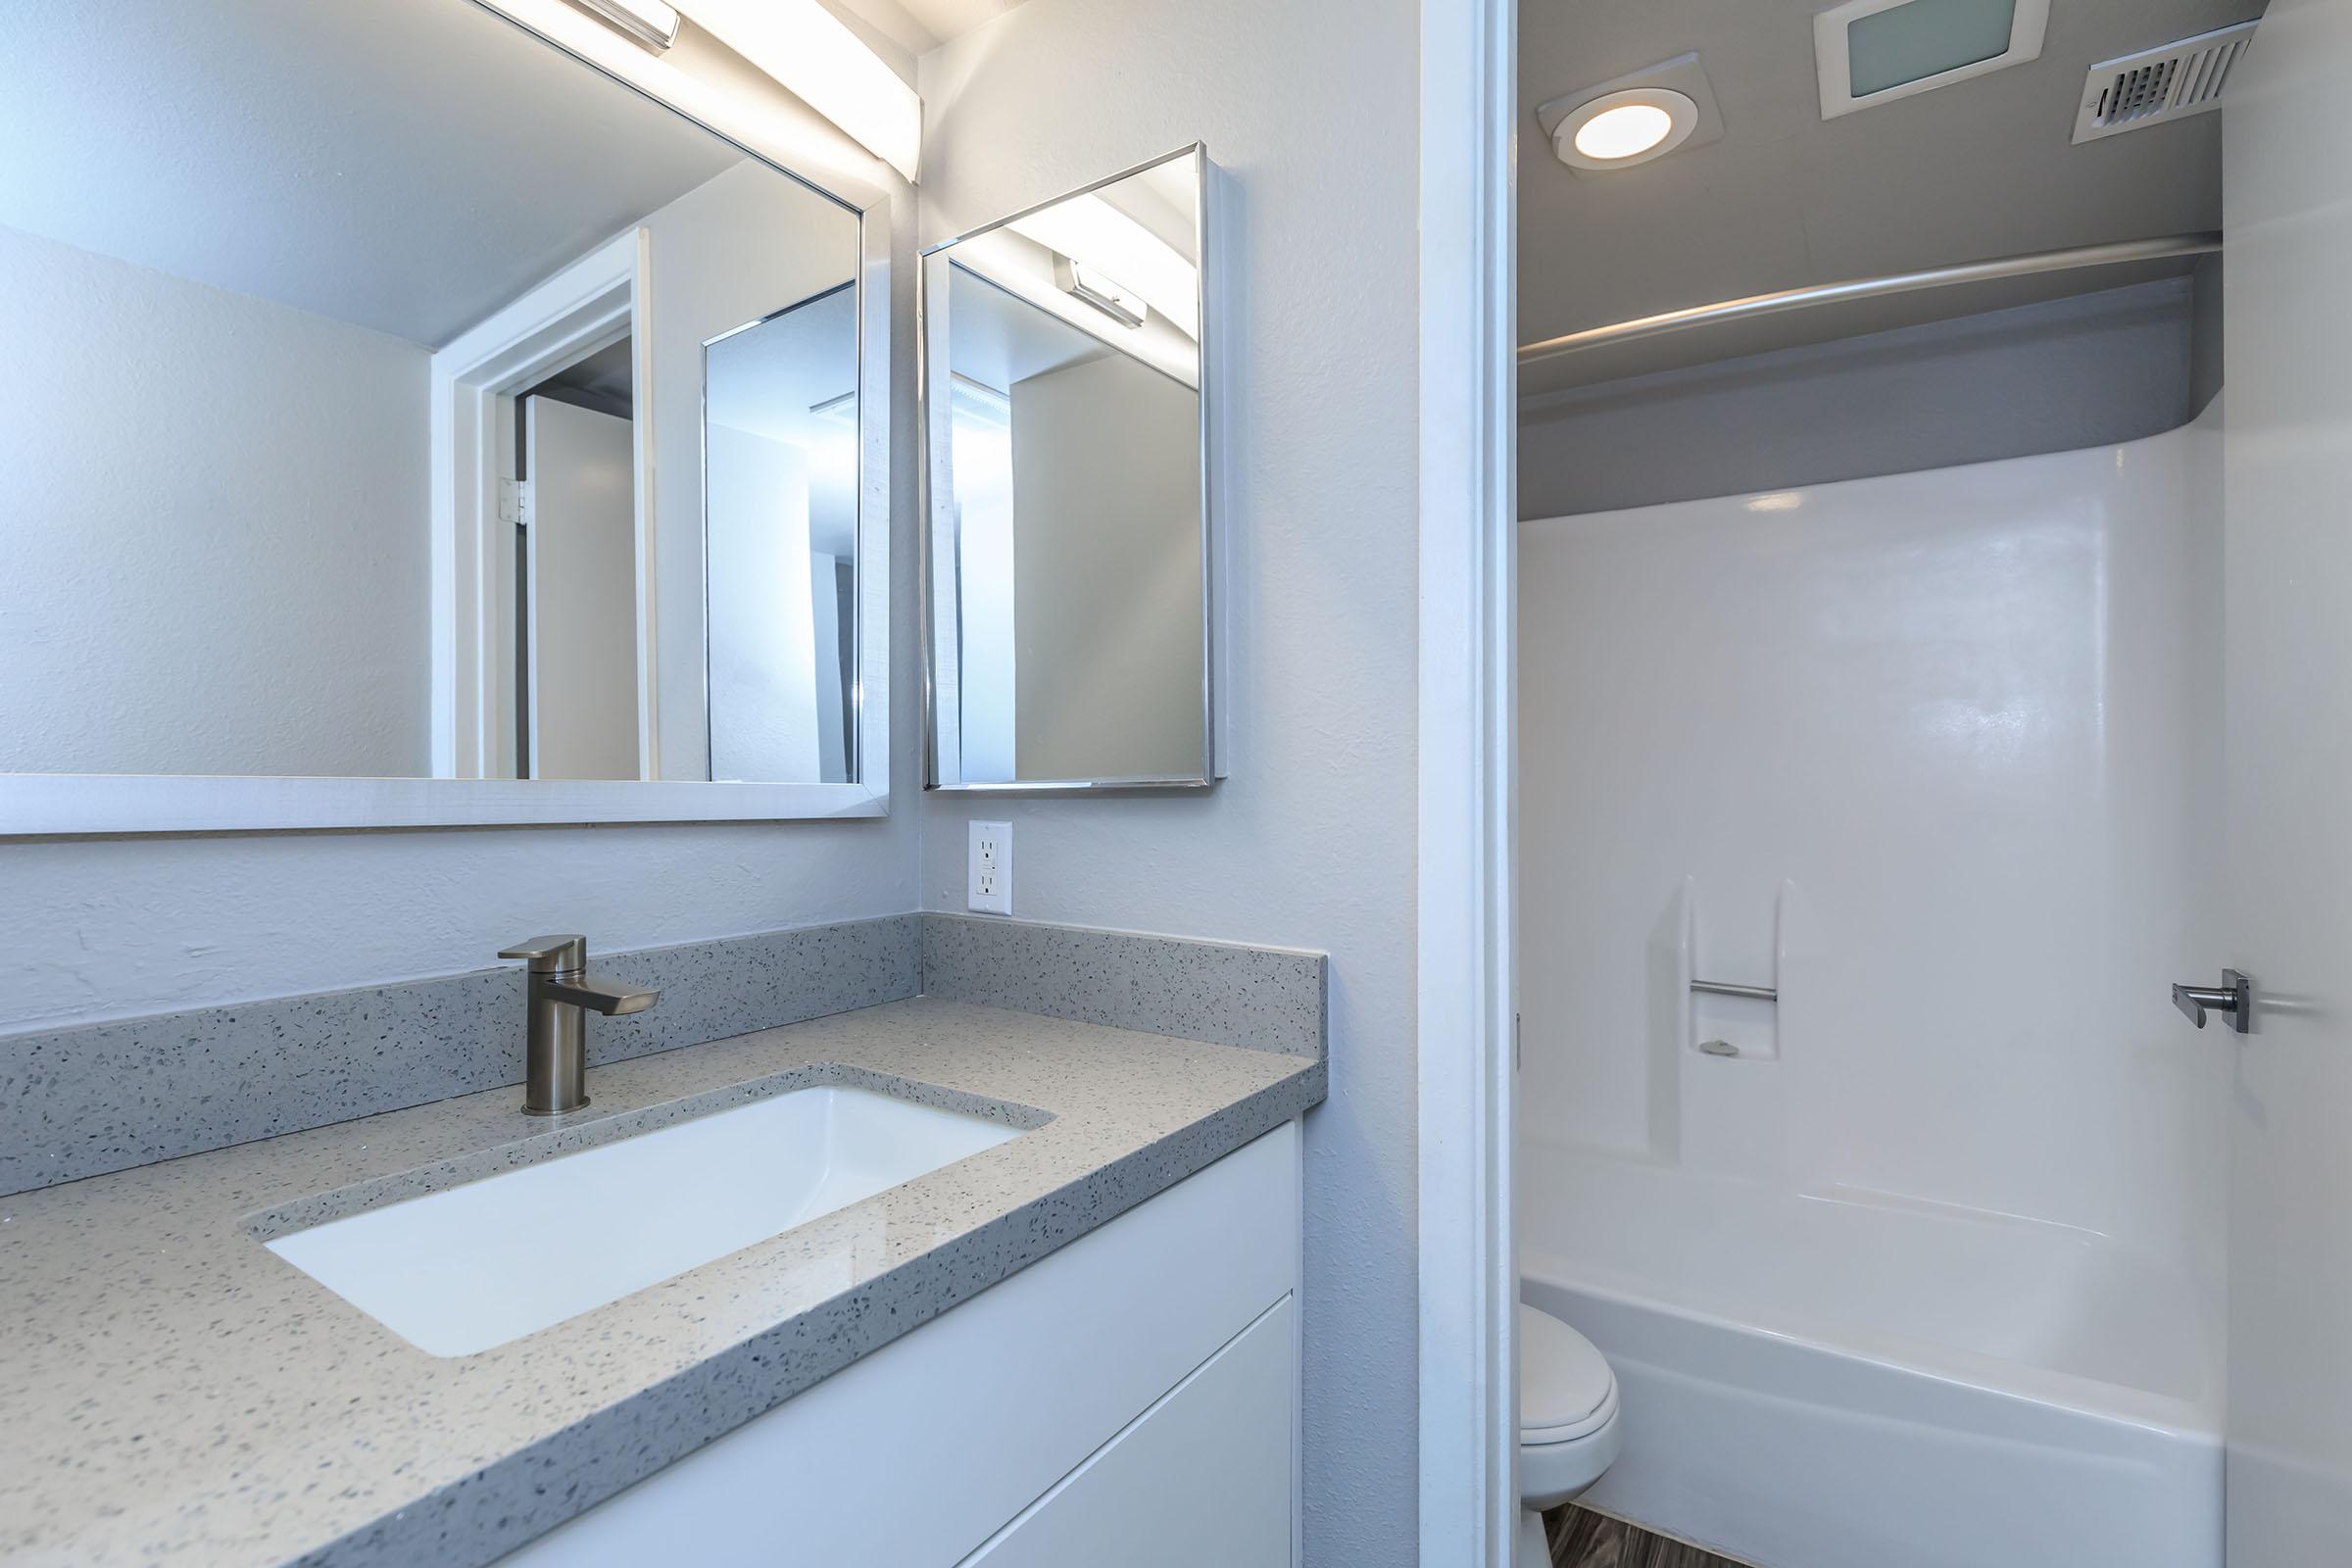 Renovated bathroom with quartz vanity and separate shower and toilet room